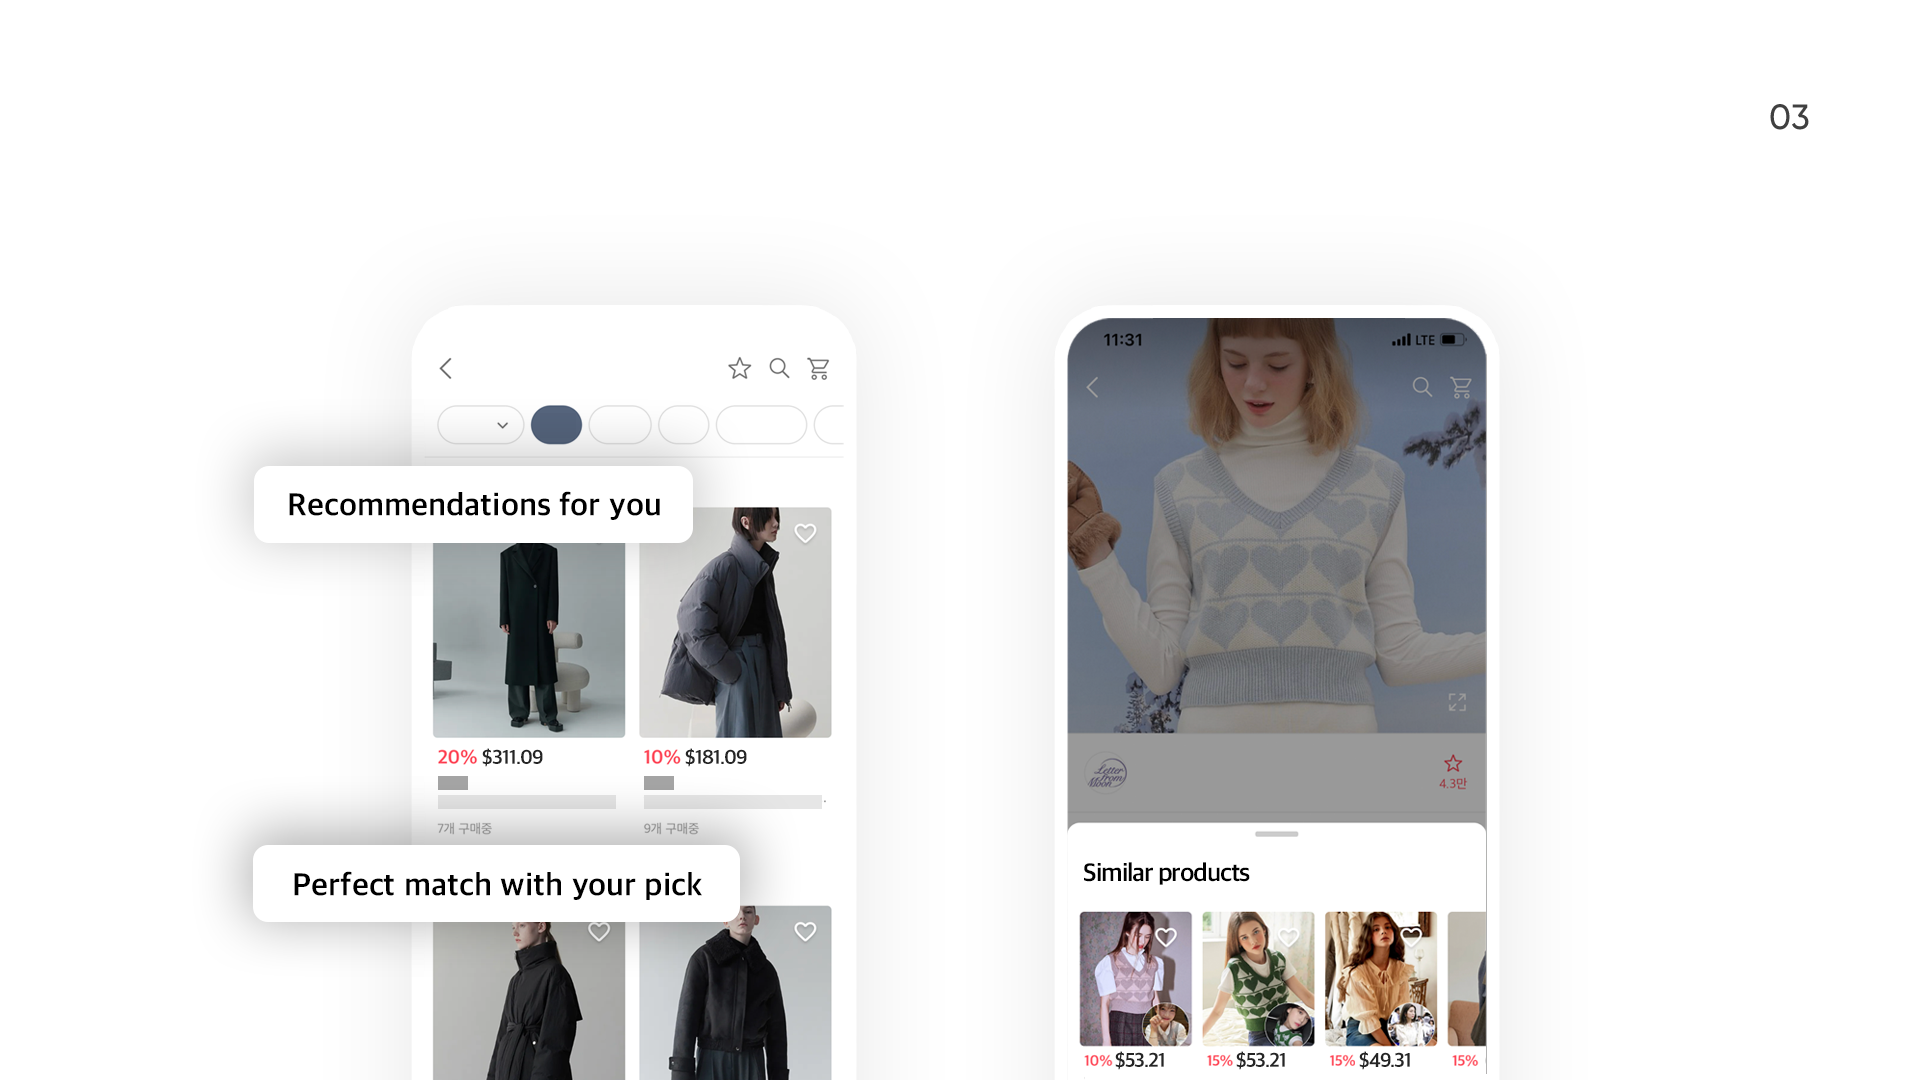 Recipe for hyper-personalization that uses AI to increase purchase conversion rate